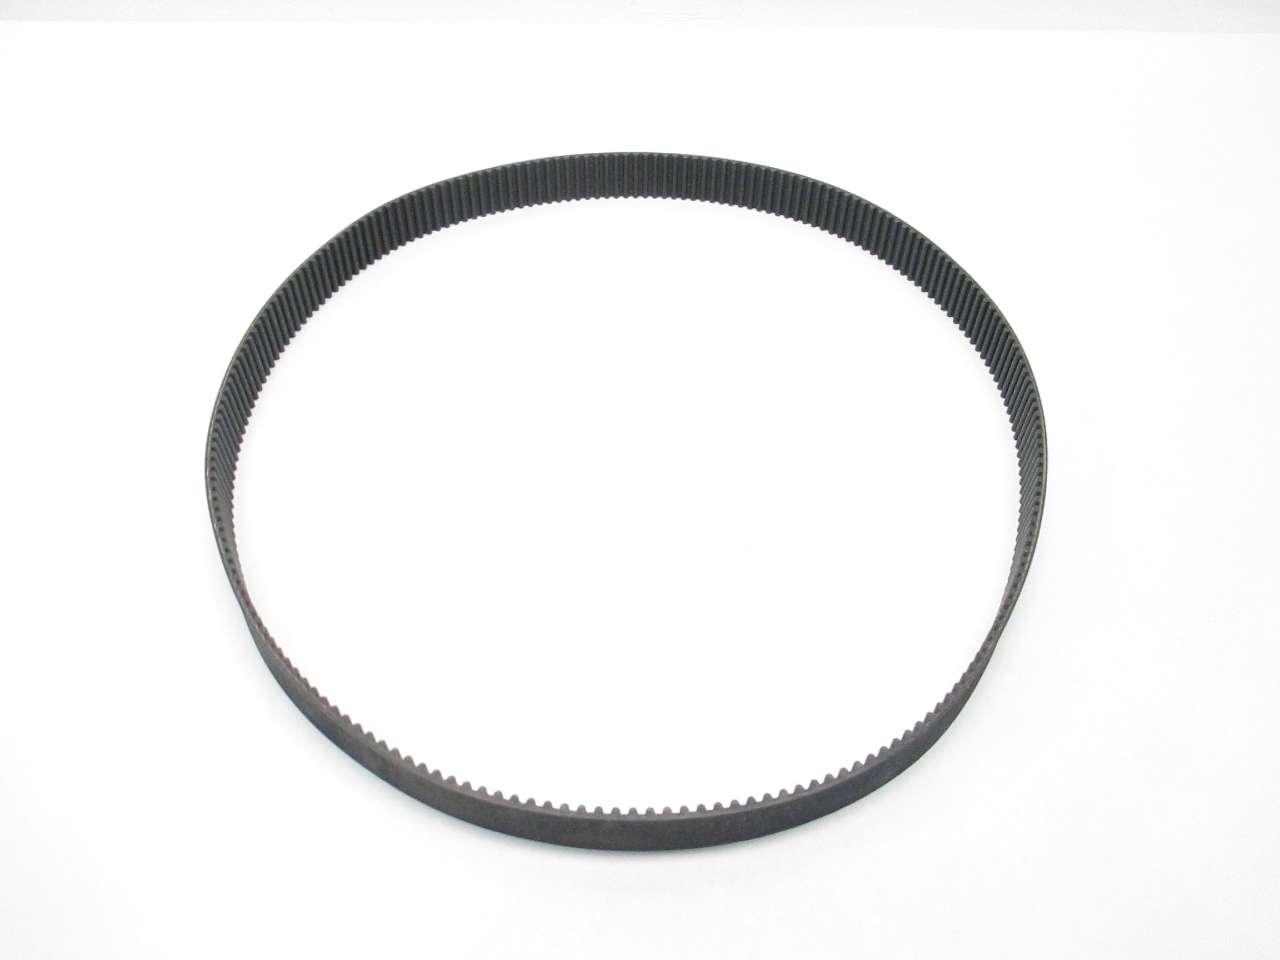 1050-5M-25 HTD Timing Belt 1050 mm Long 25mm wide & 5mm Pitch 